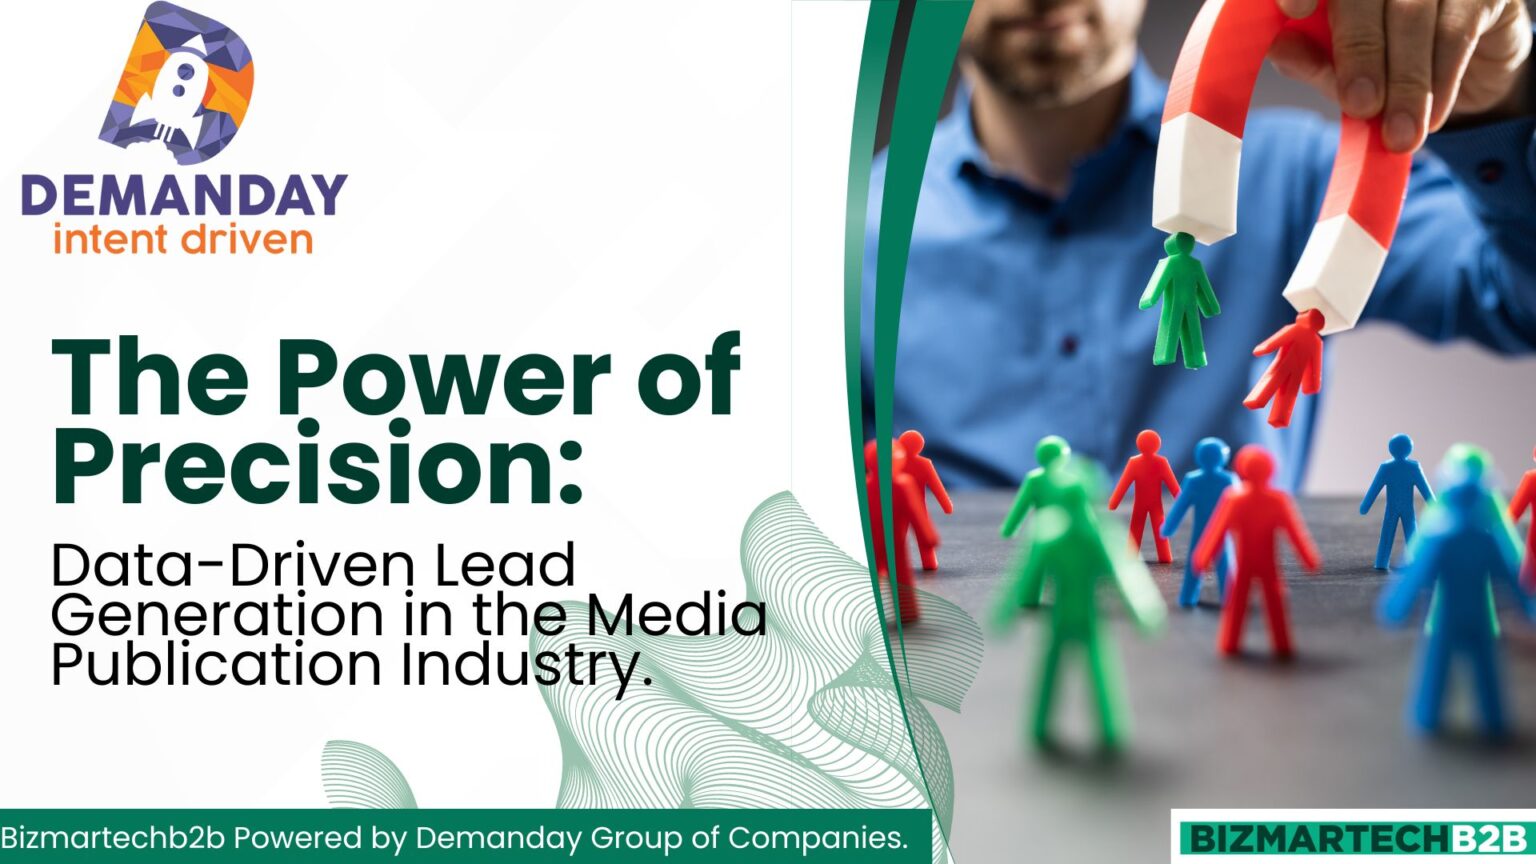 The Power of Precision: Data-Driven Lead Generation in the Media Publication Industry